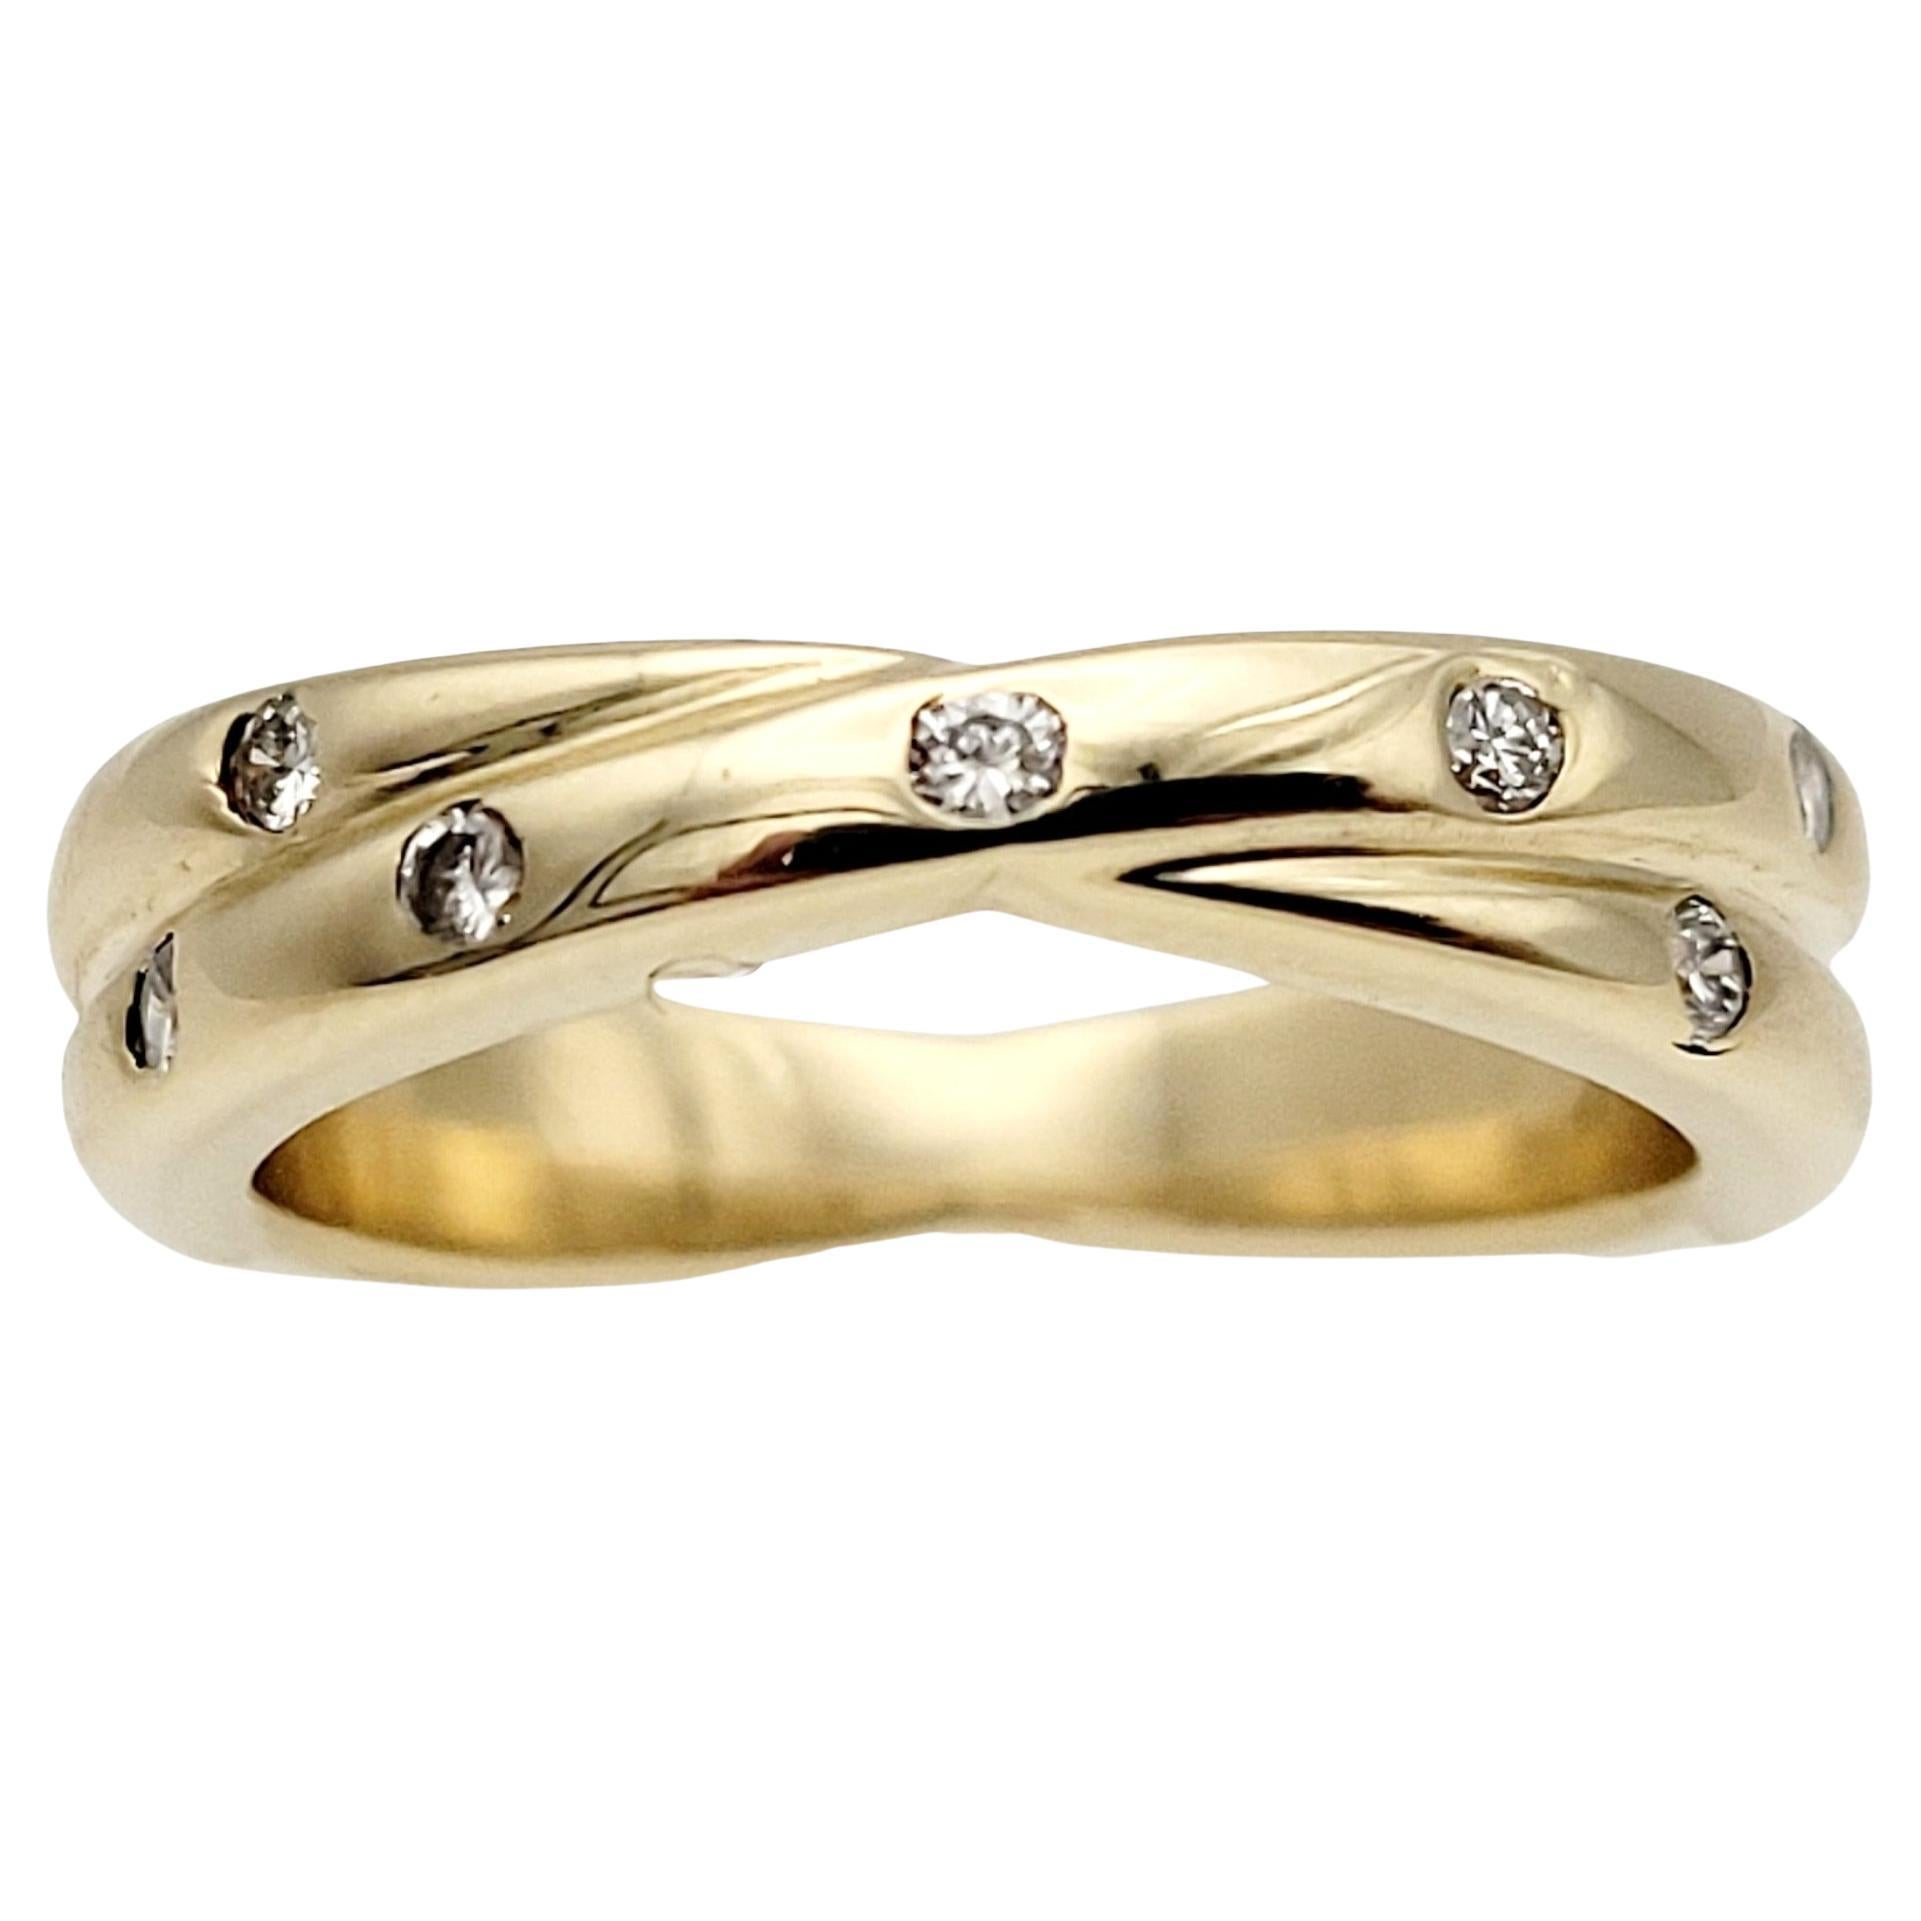 Double Band Crossover Ring with Diamonds in Polished 14 Karat Yellow Gold 